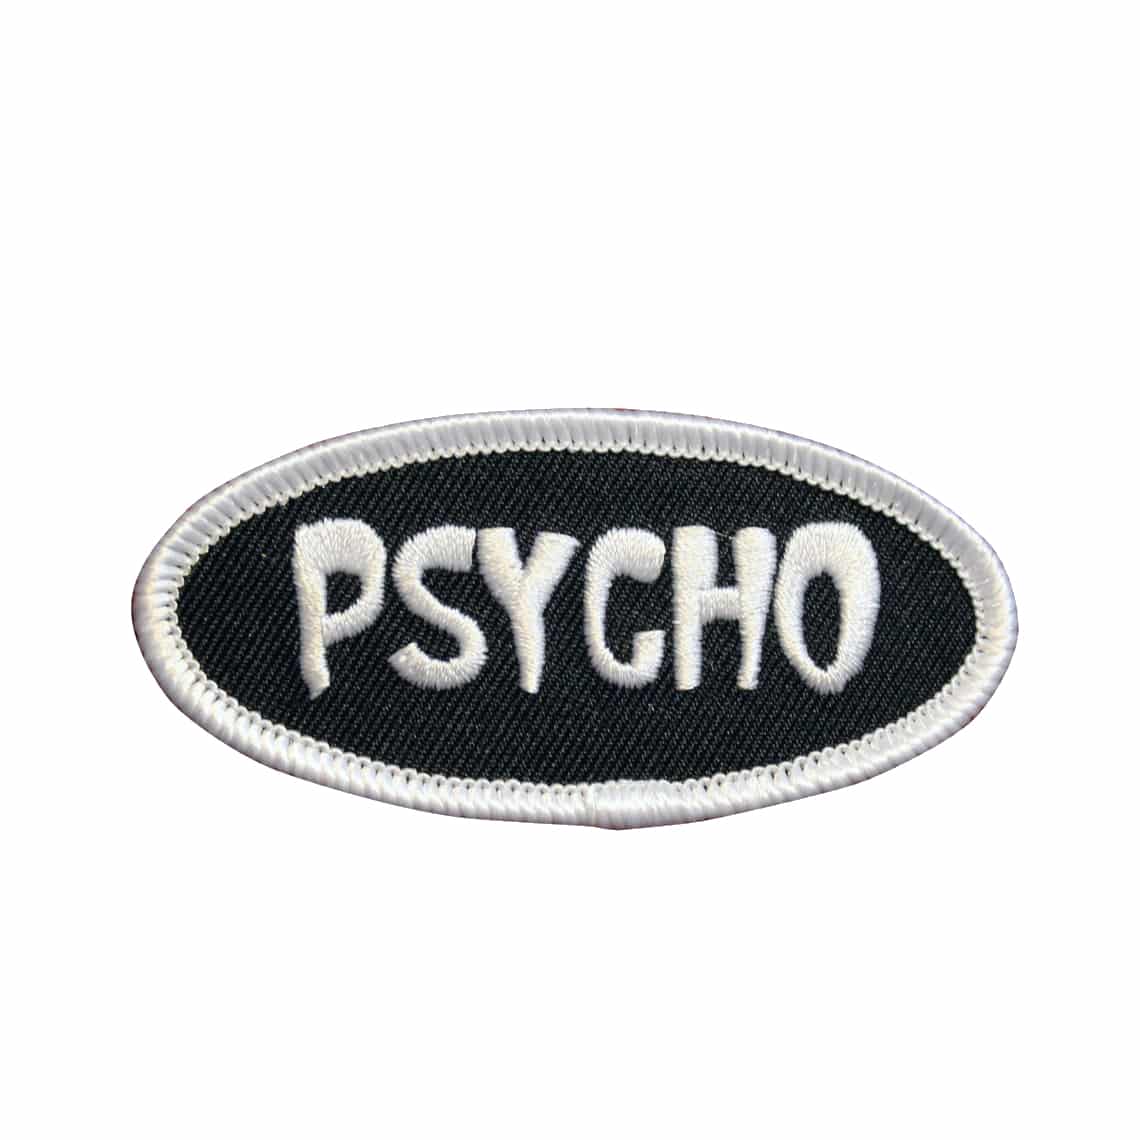 Psycho Name Tag Patch